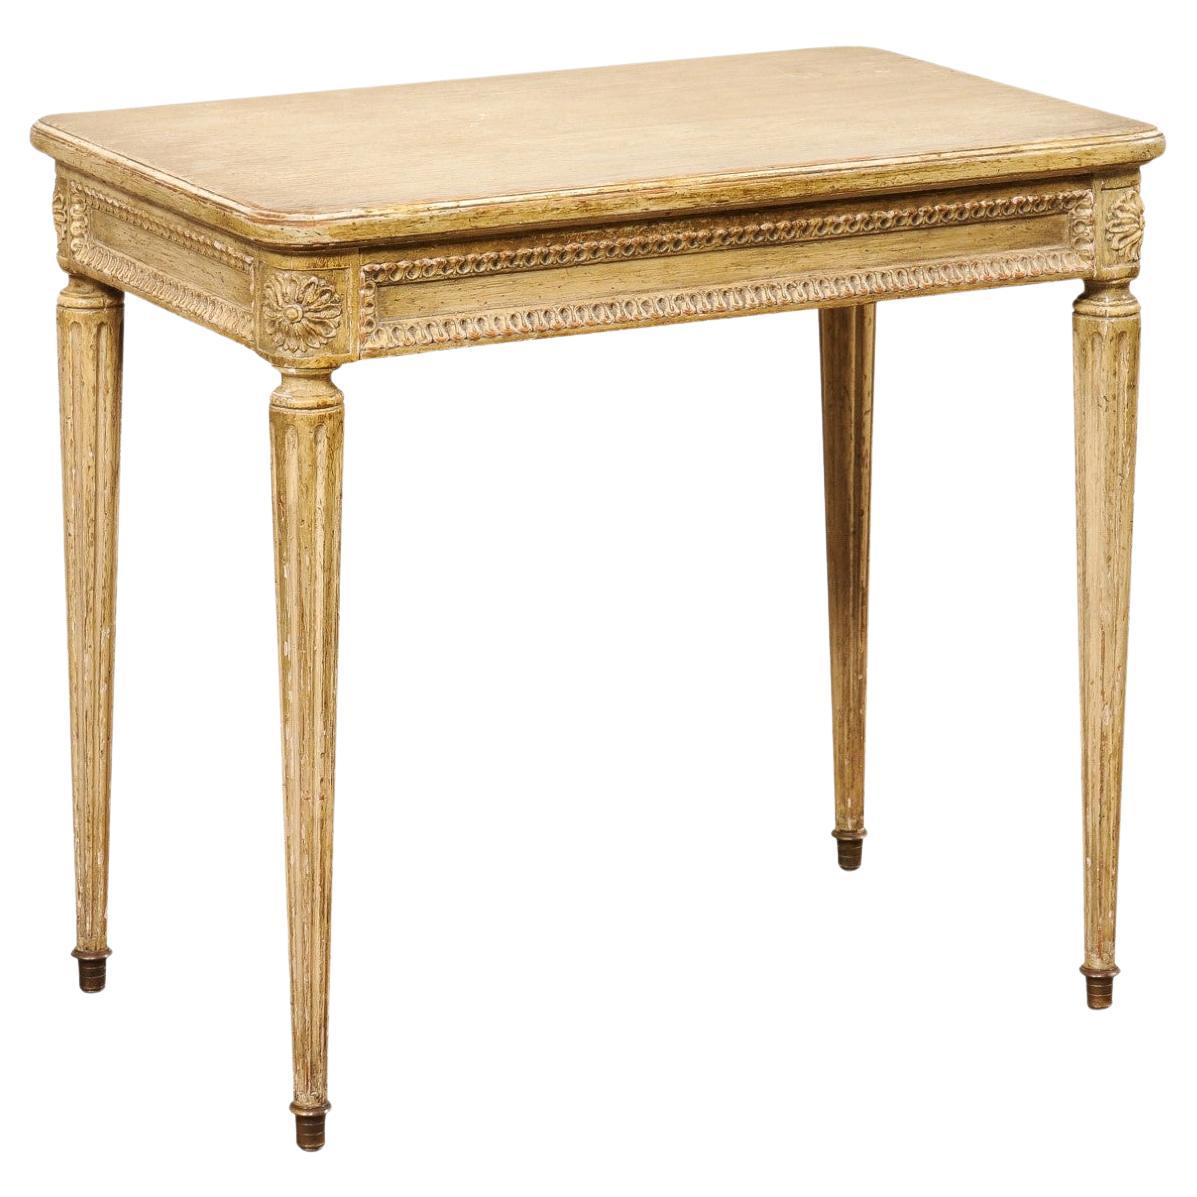 Louis XVI Style French Side Table with its Original Painted Finish Early 20th C. For Sale